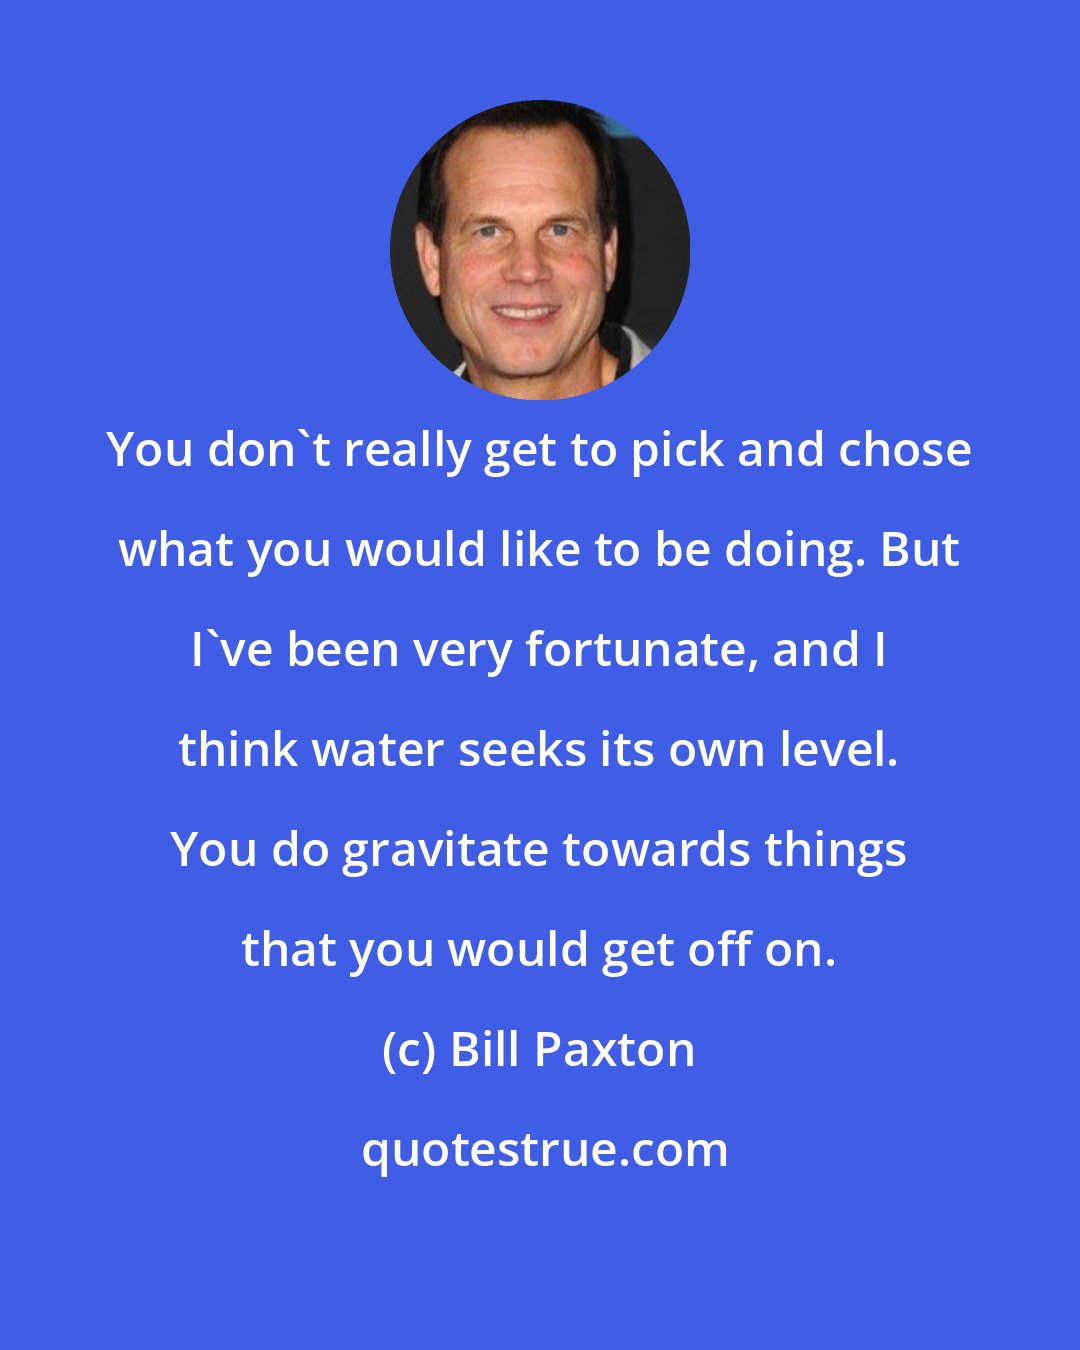 Bill Paxton: You don't really get to pick and chose what you would like to be doing. But I've been very fortunate, and I think water seeks its own level. You do gravitate towards things that you would get off on.